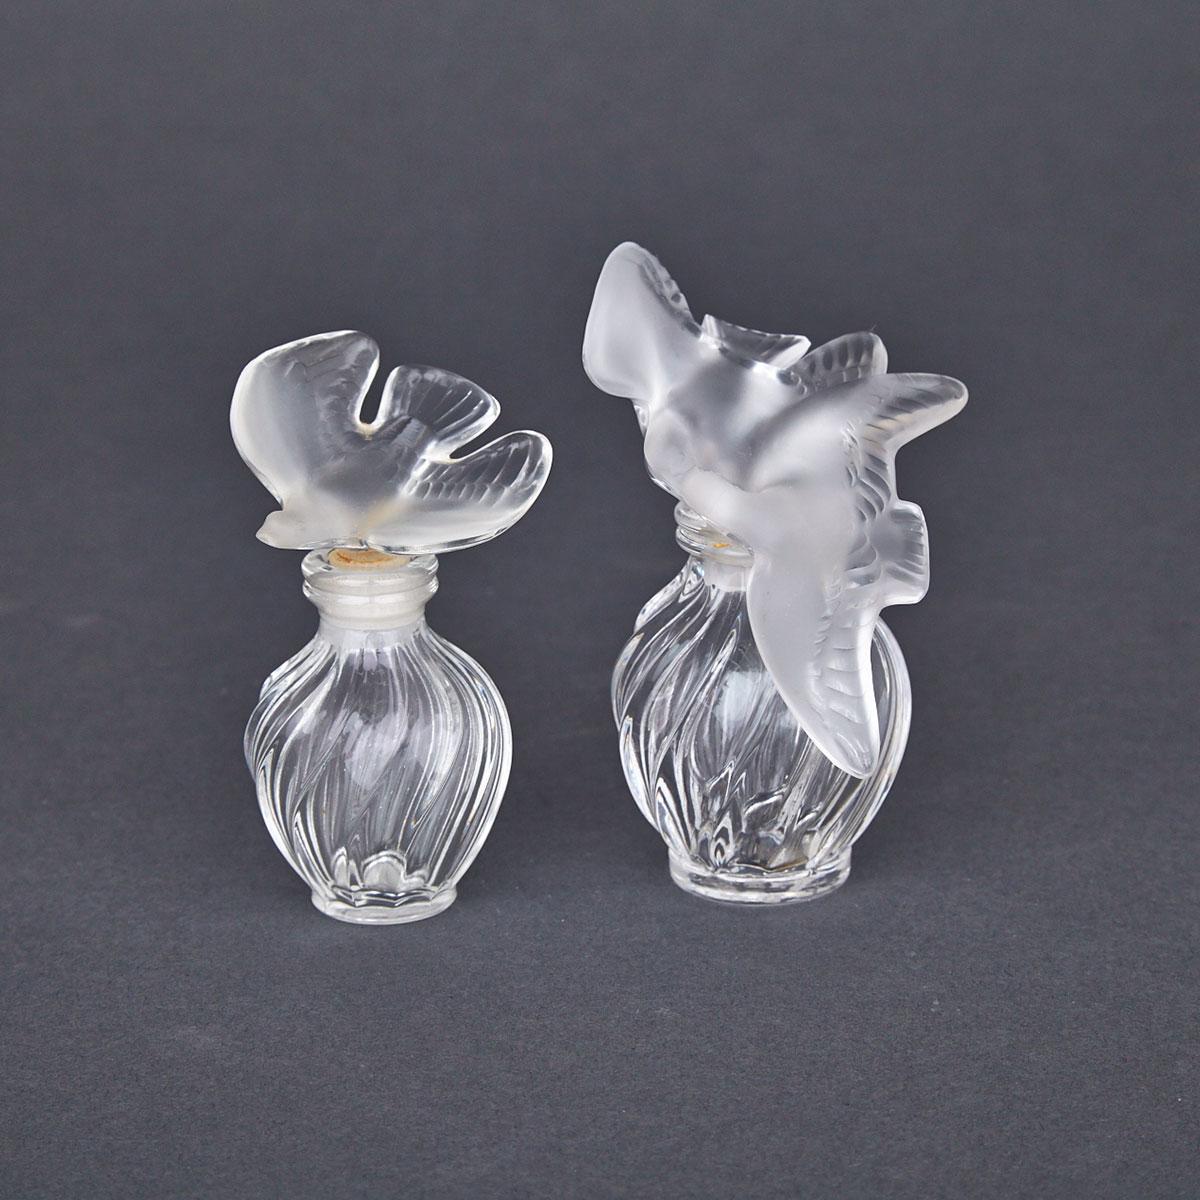 ‘L’Air du Temps’, Two Lalique Moulded and Frosted Glass Perfume Bottles, for Nina Ricci, post-1945